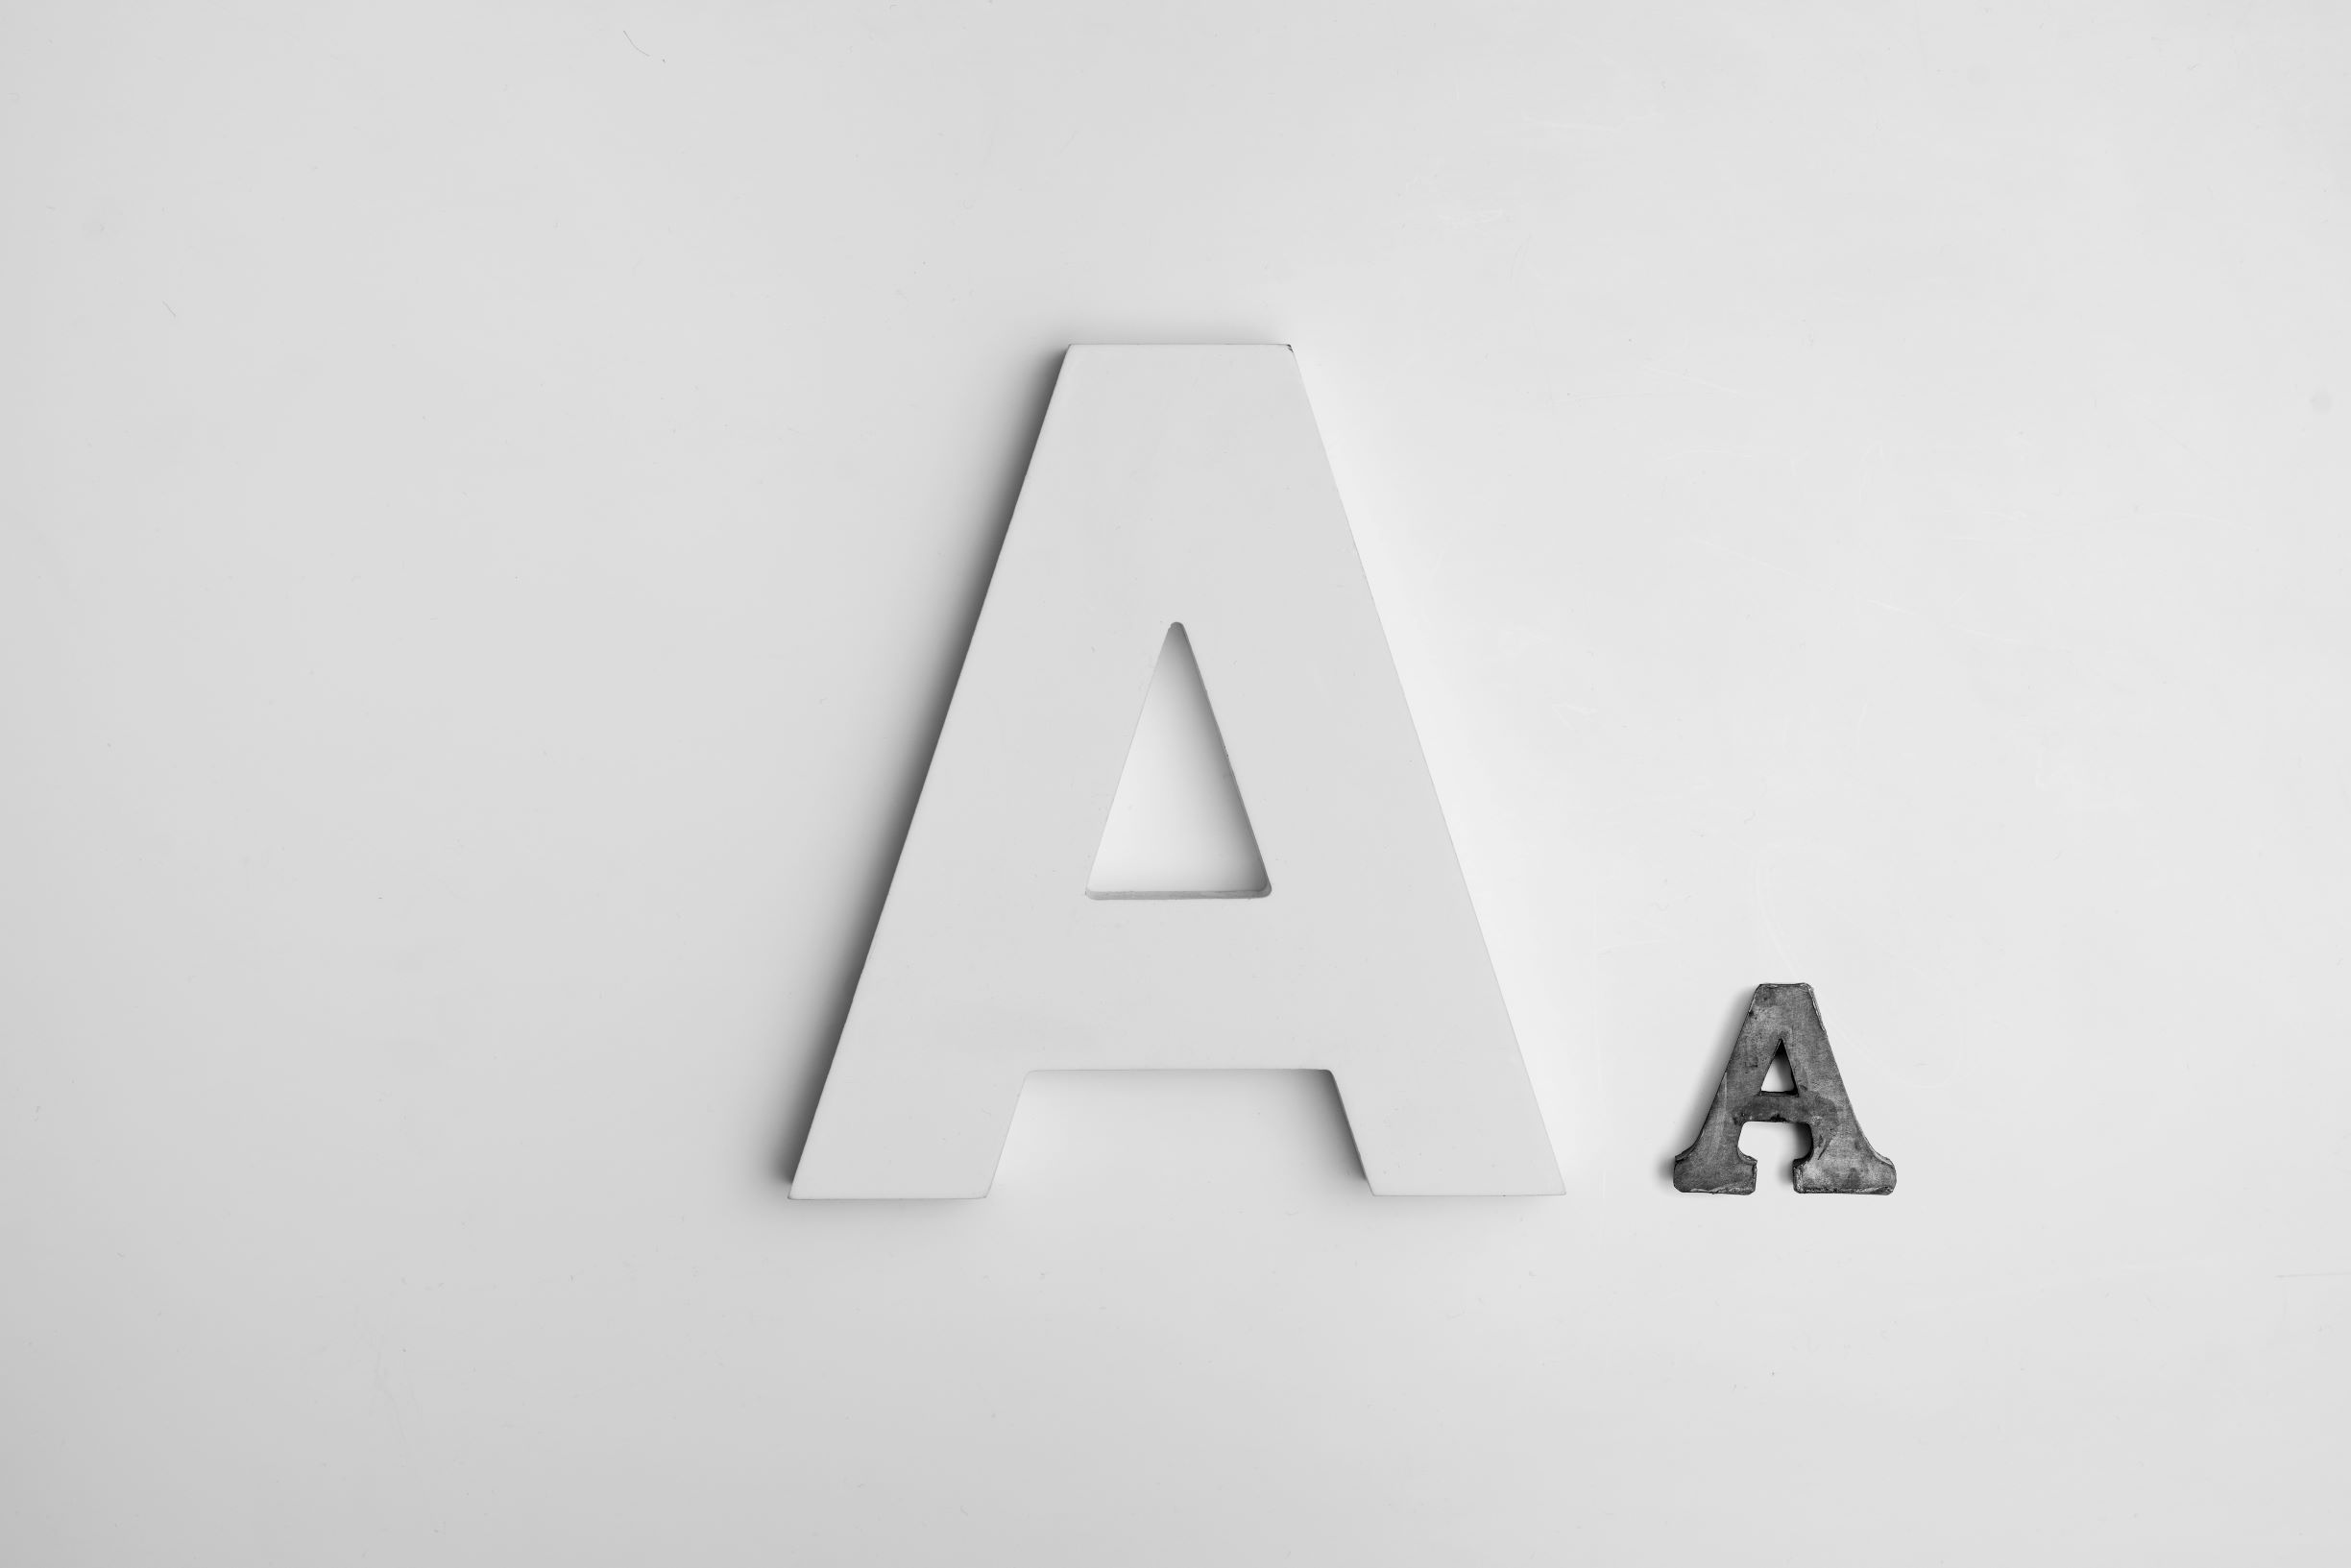 Capital and small letter "A". Connects to letter/sound identification, aka phonemic awareness.